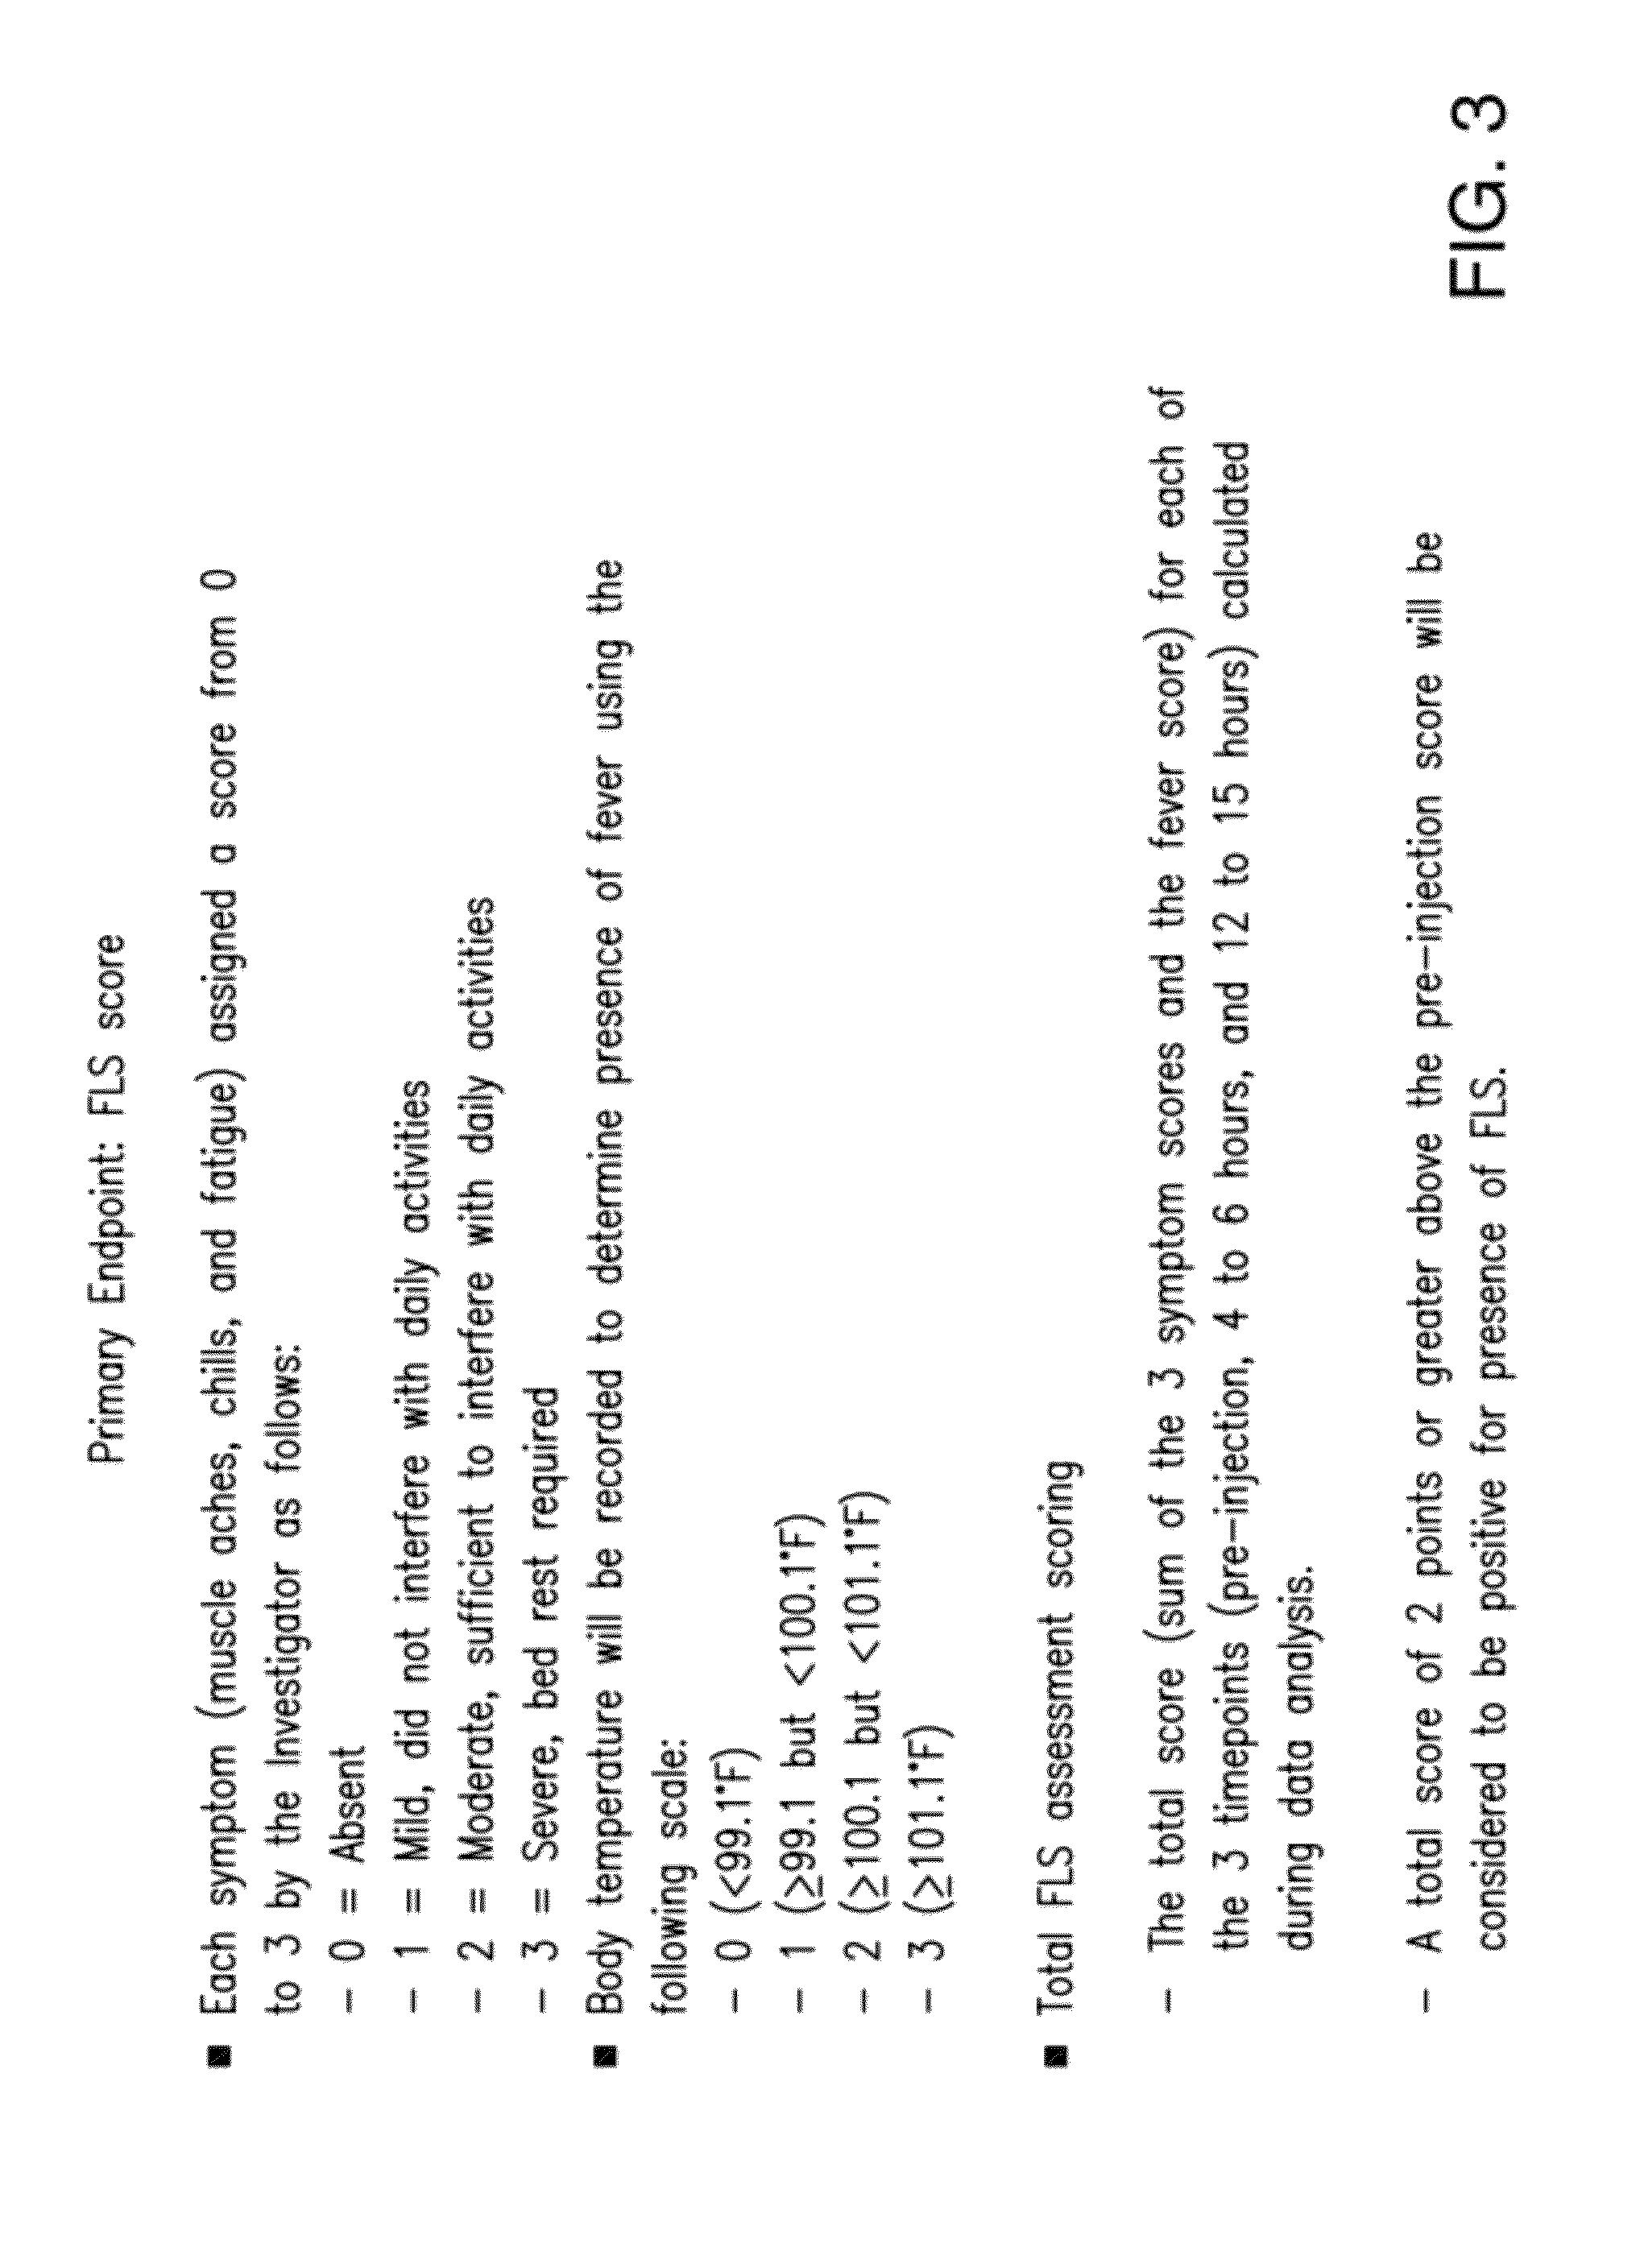 Method for reducing flu-like symptoms associated with intramuscular administration of interferon using a fast titration escalating dosing regimen